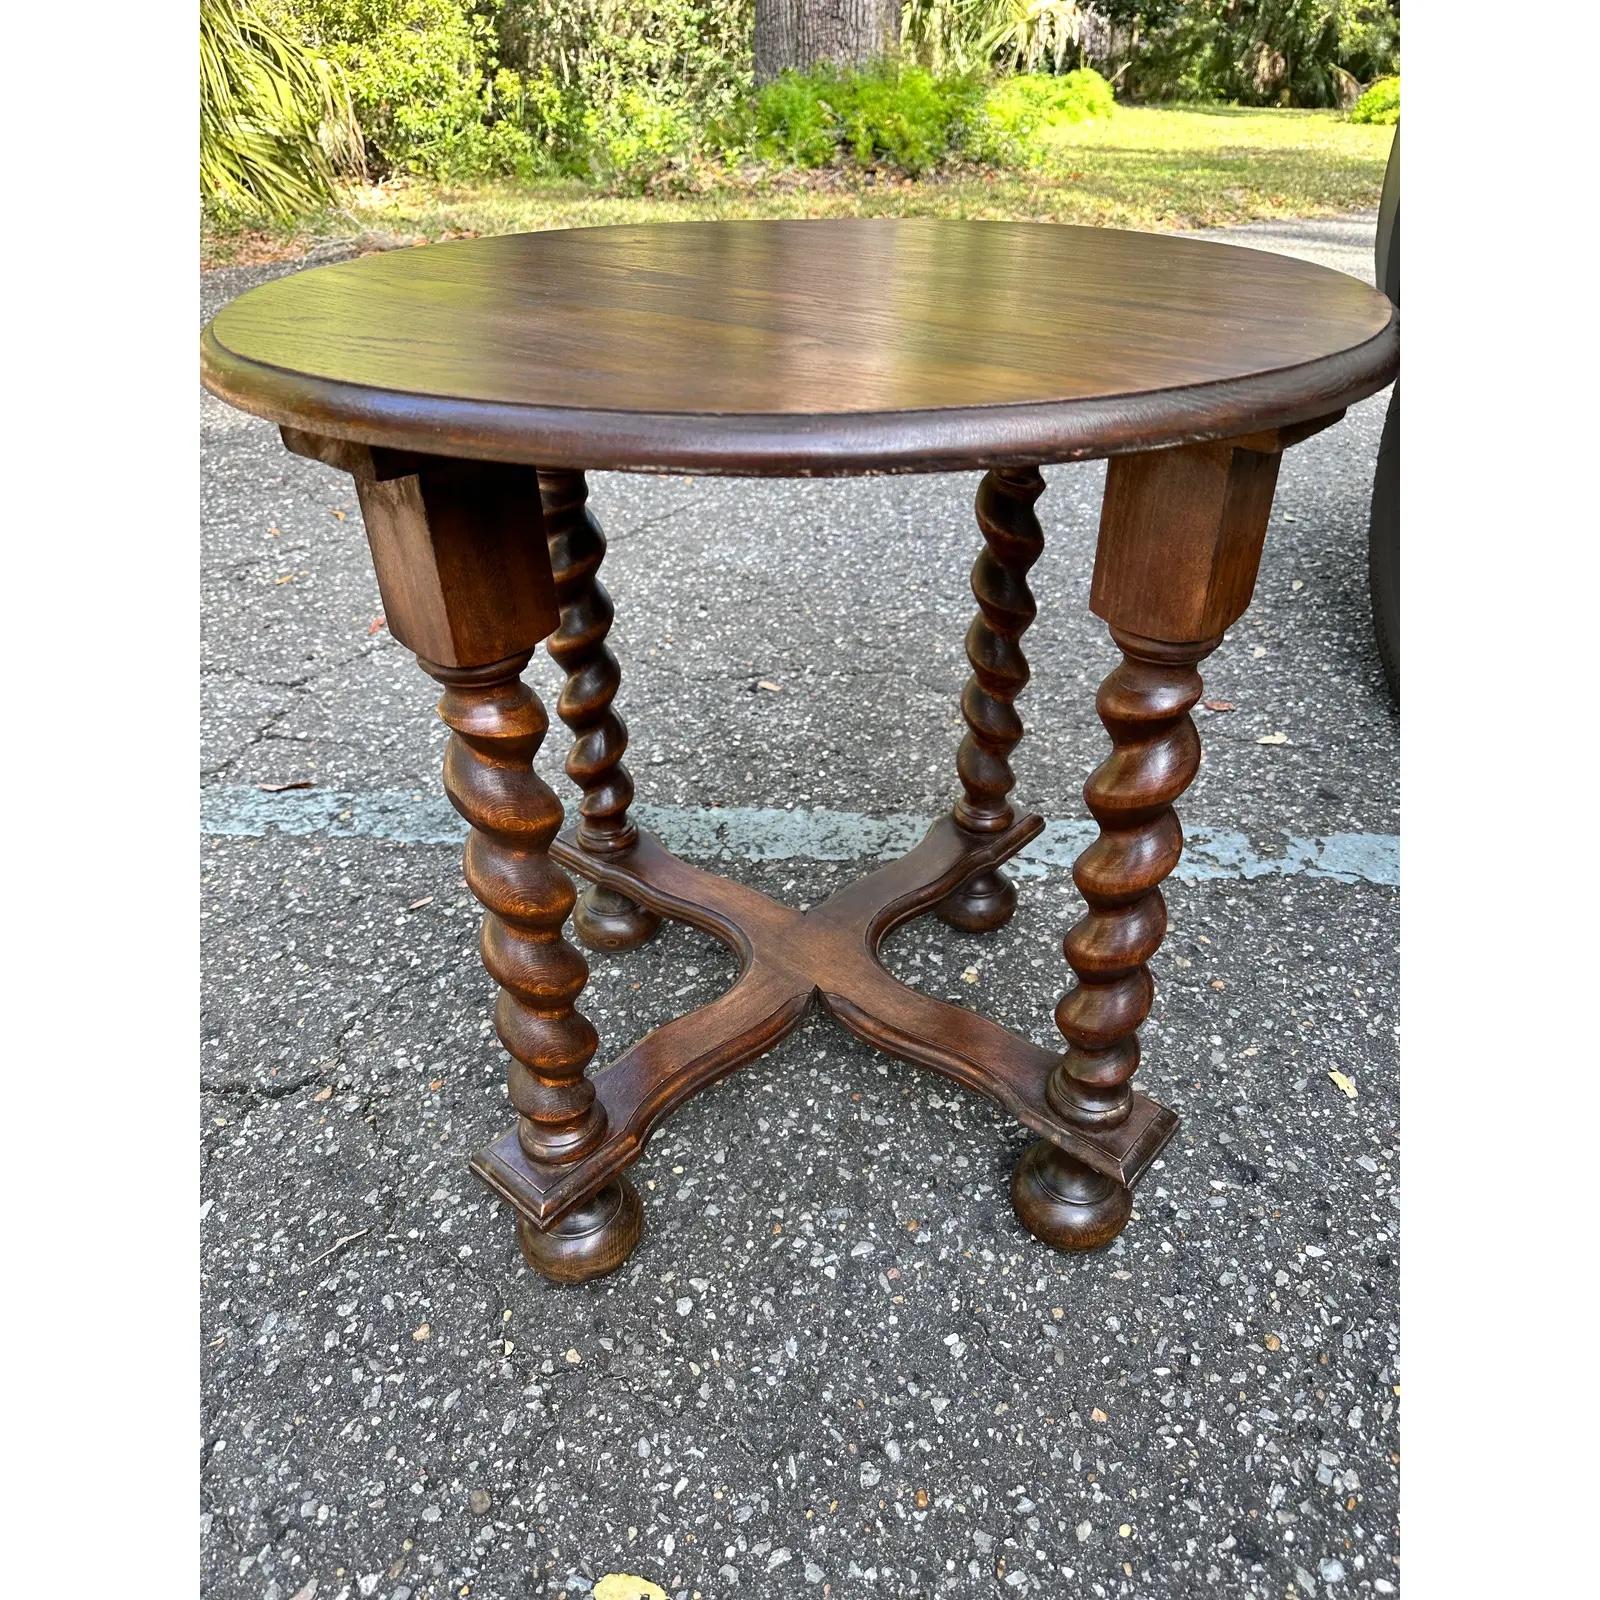 19th Century English Side Table In Excellent Condition For Sale In Nashville, TN